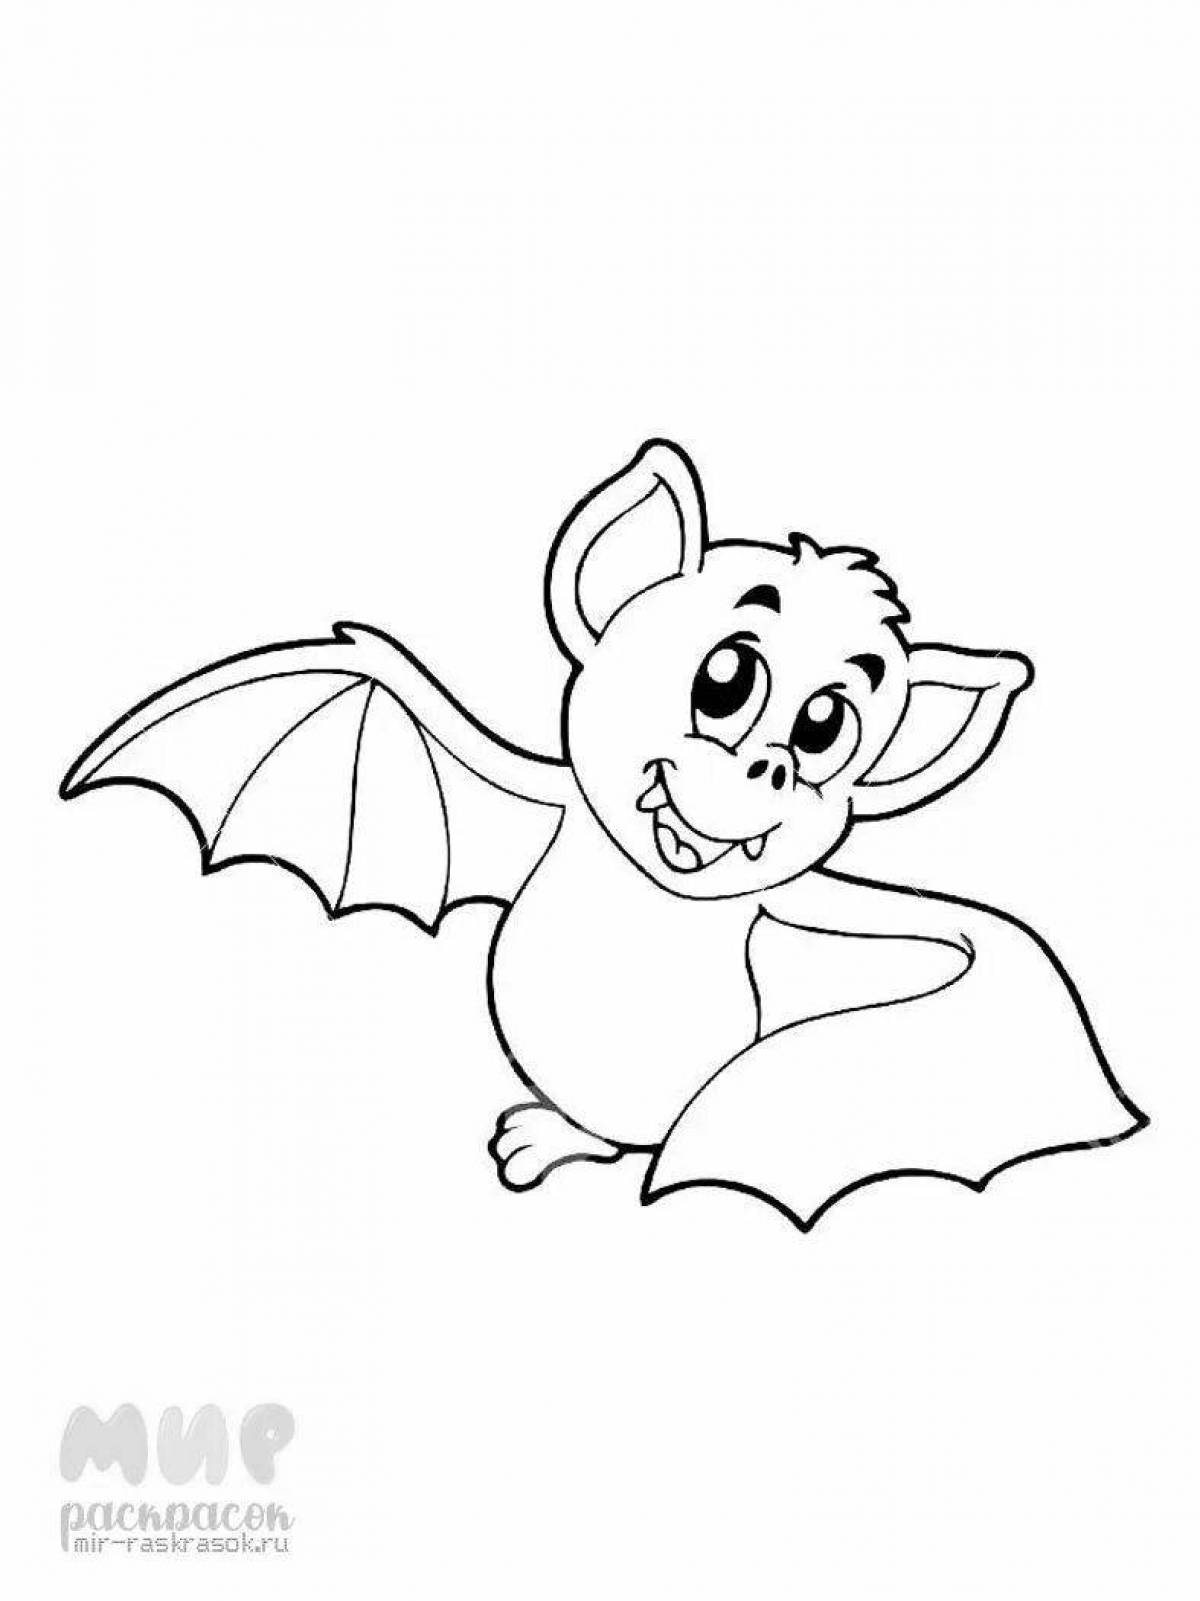 Cute flying mouse coloring book